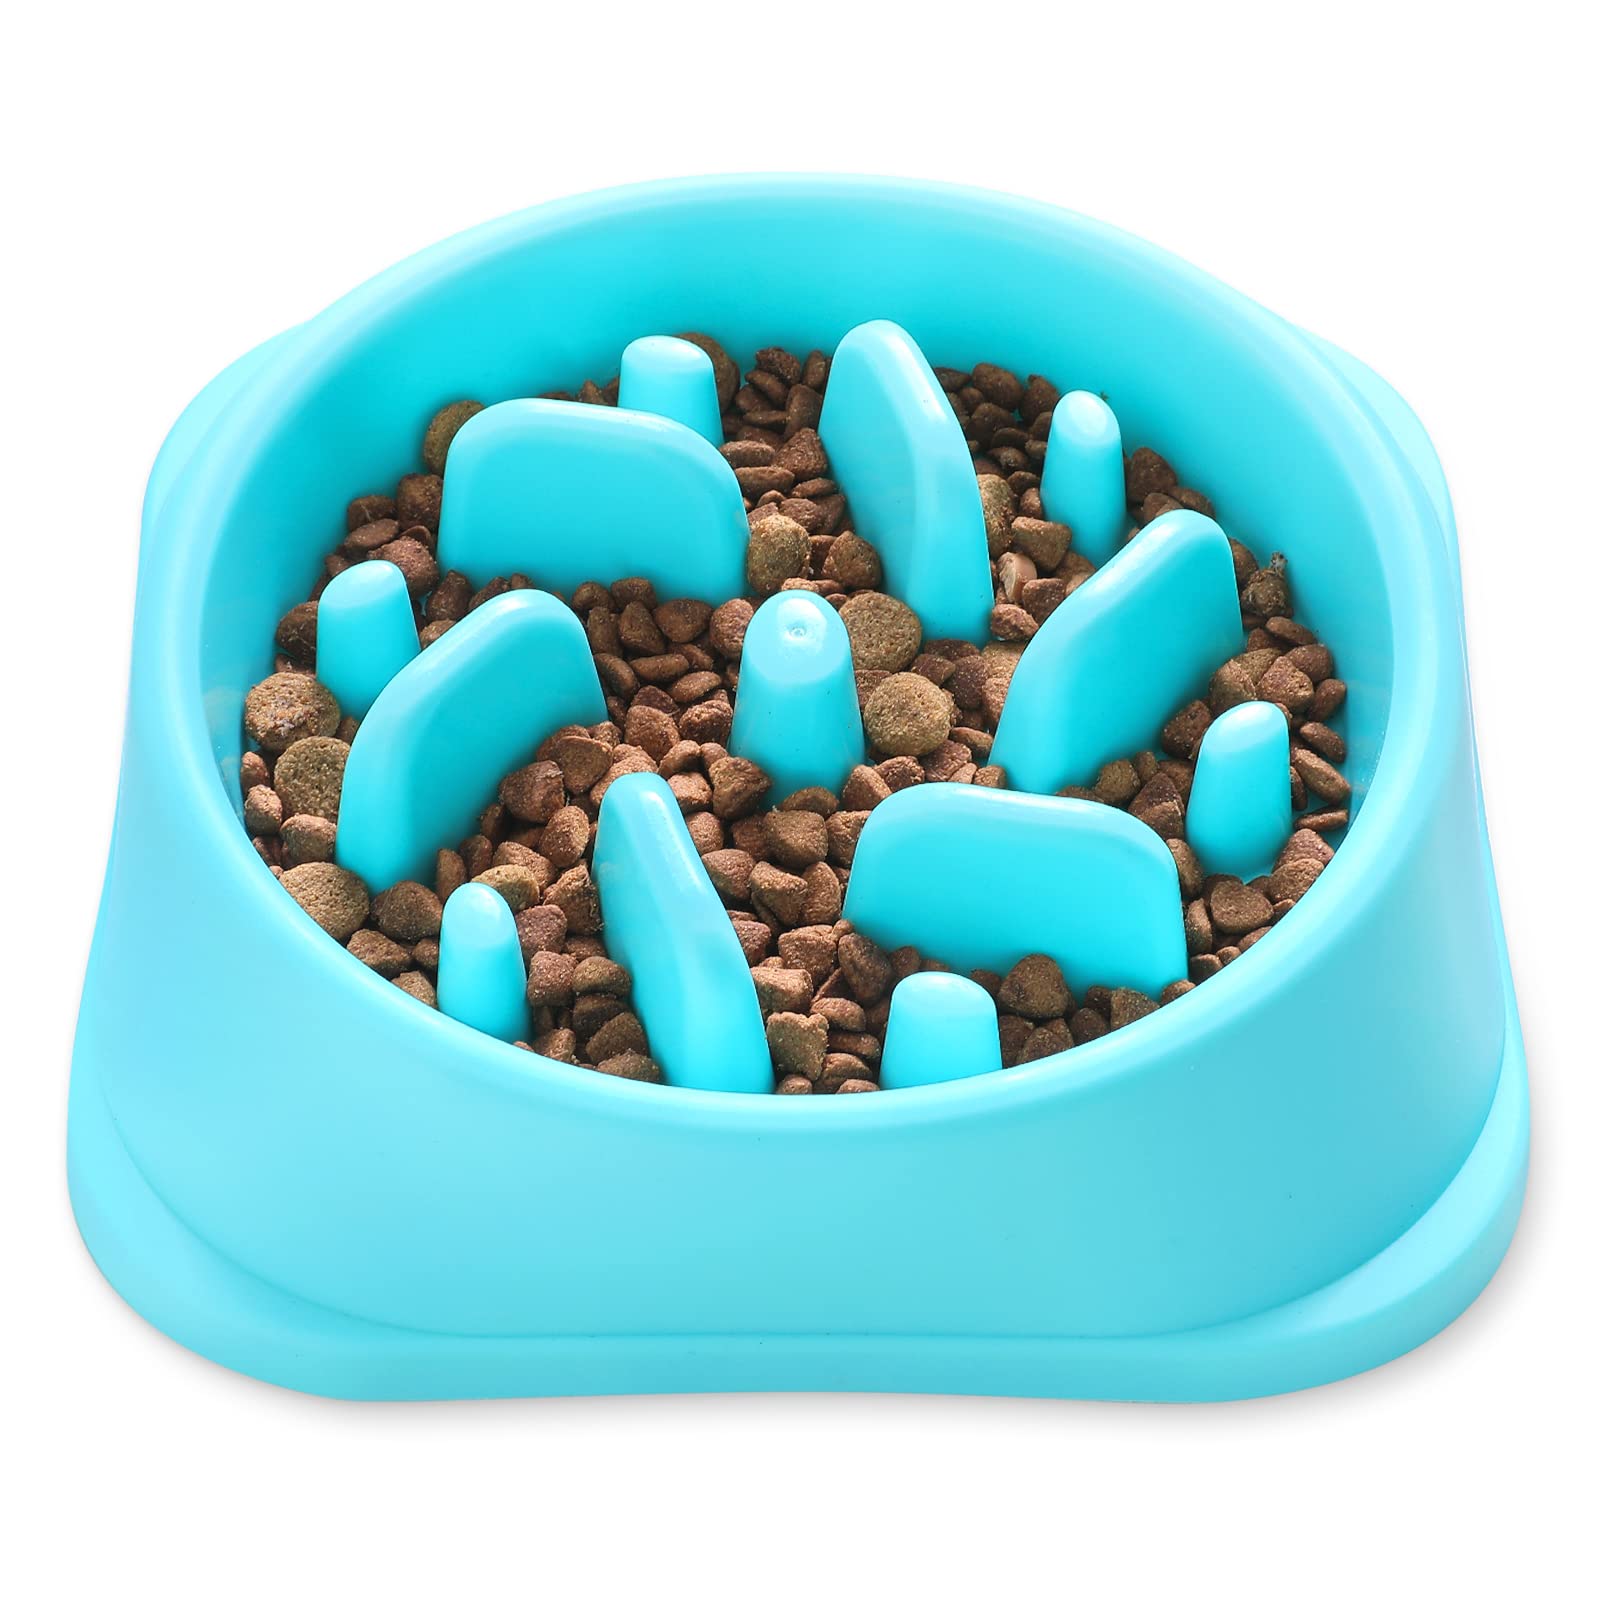 Slow Feeder Pet Food Bowl for Dogs, Cats and more- Prevents Choking!